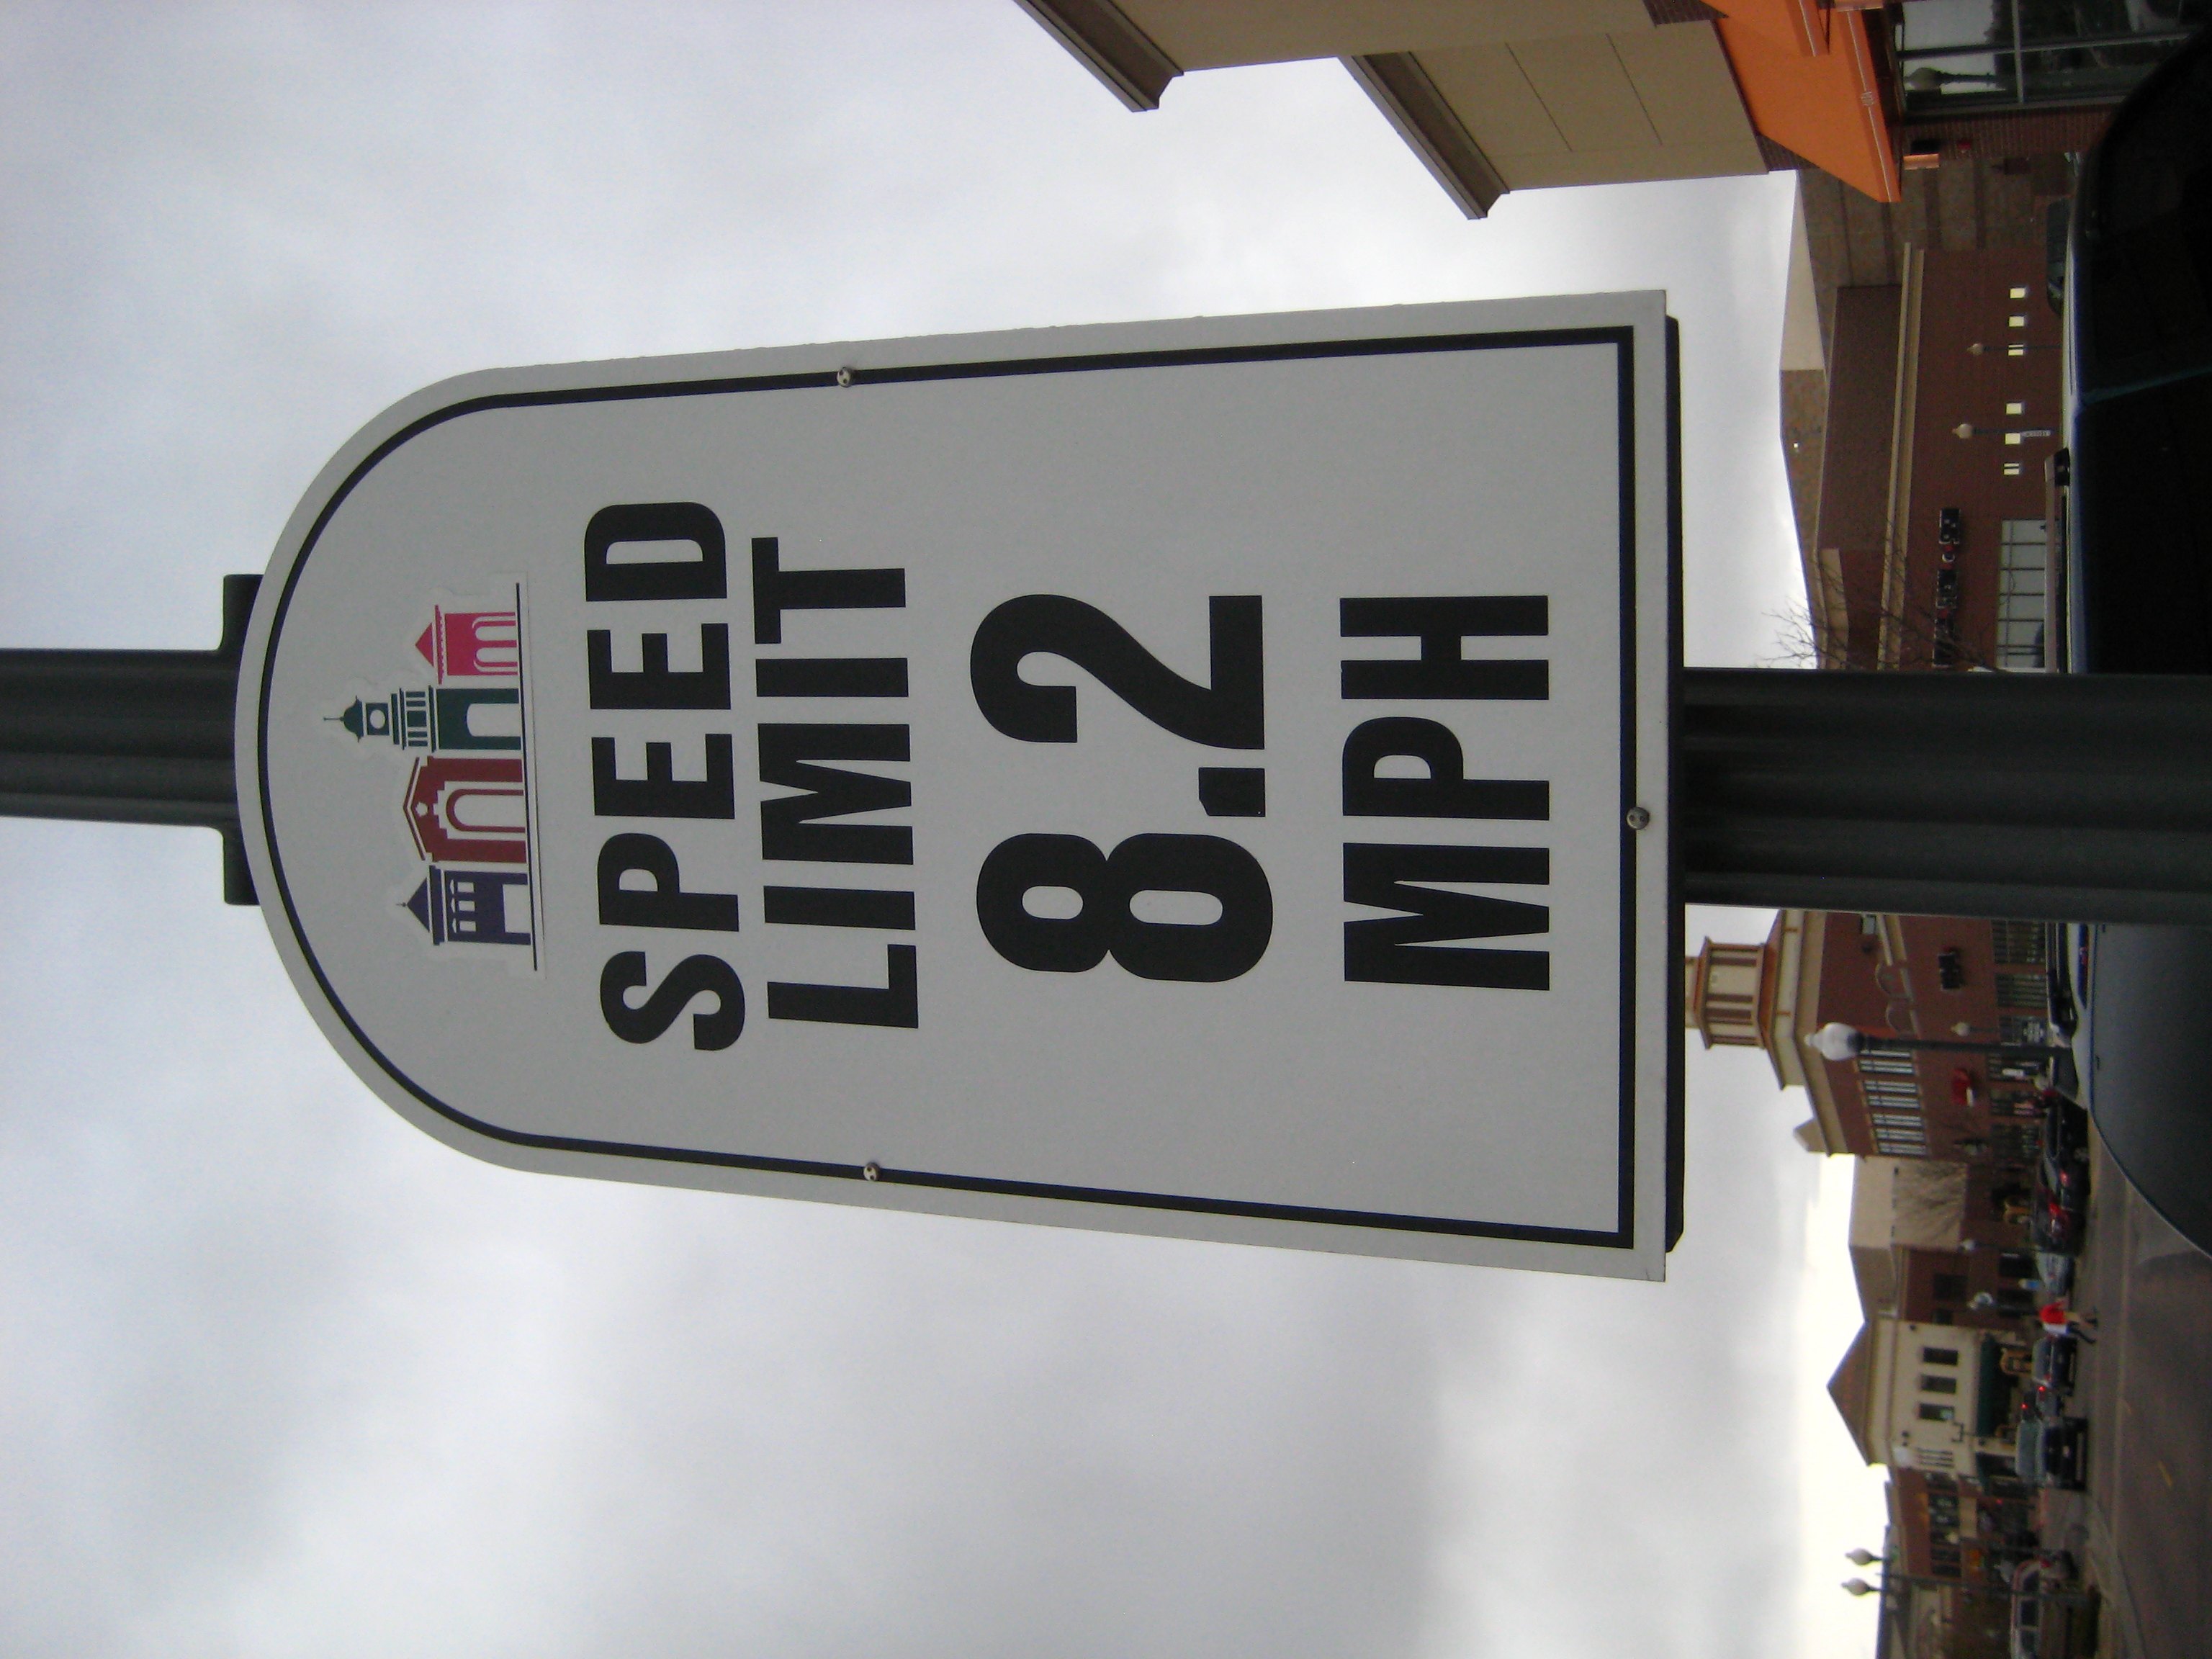 The most bizarre speed limit sign I’ve ever seen